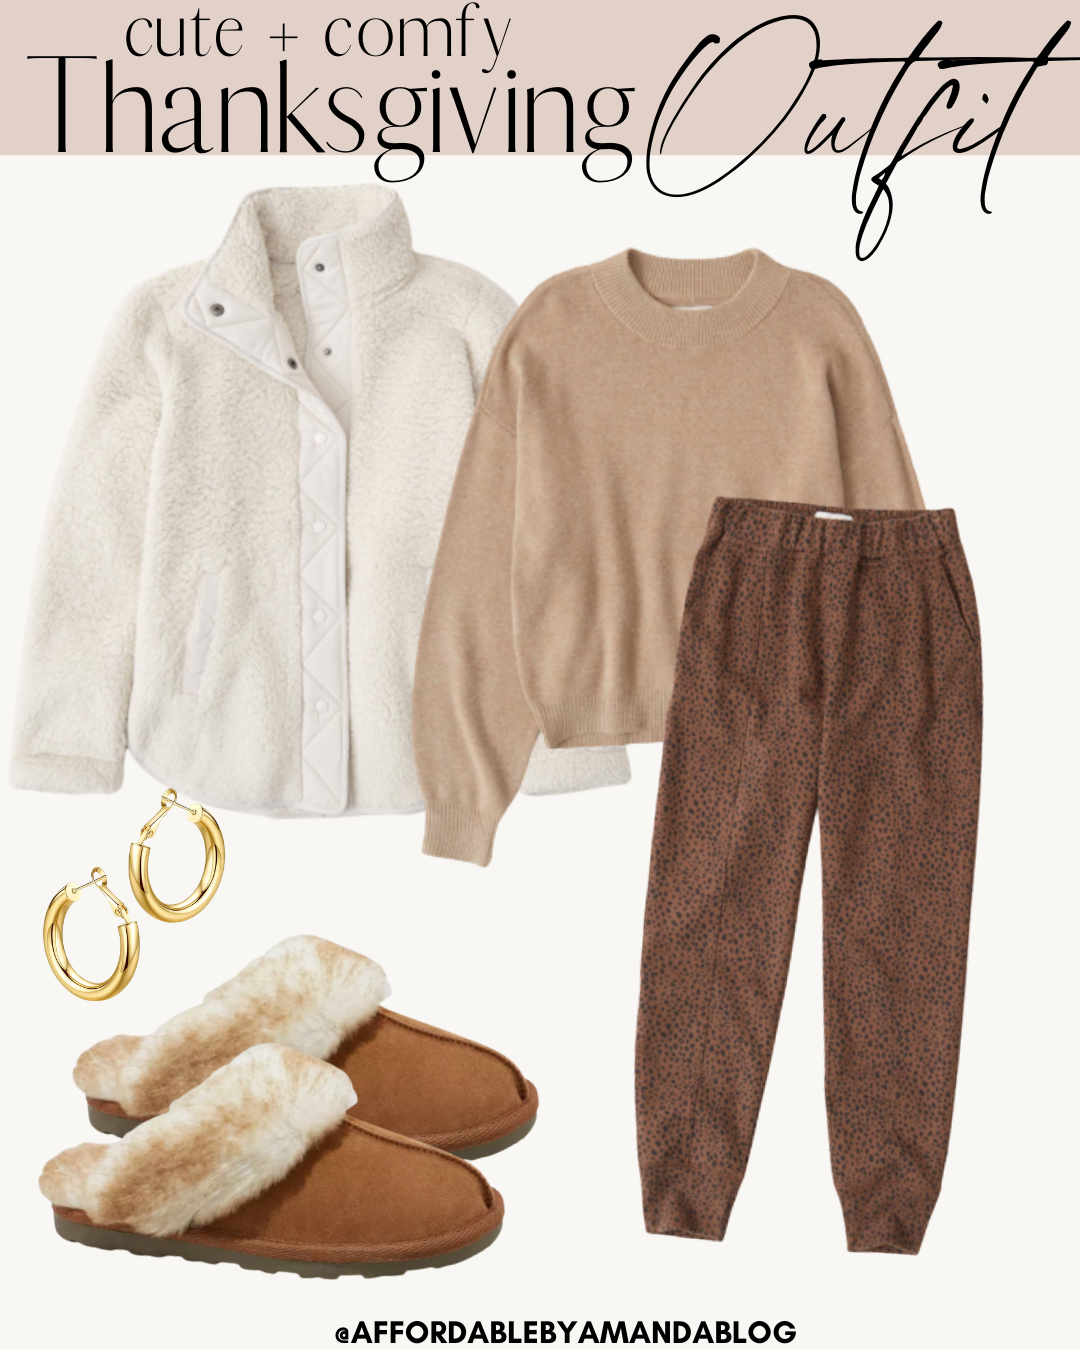 21 Cute Thanksgiving Outfits Ideas for 2020